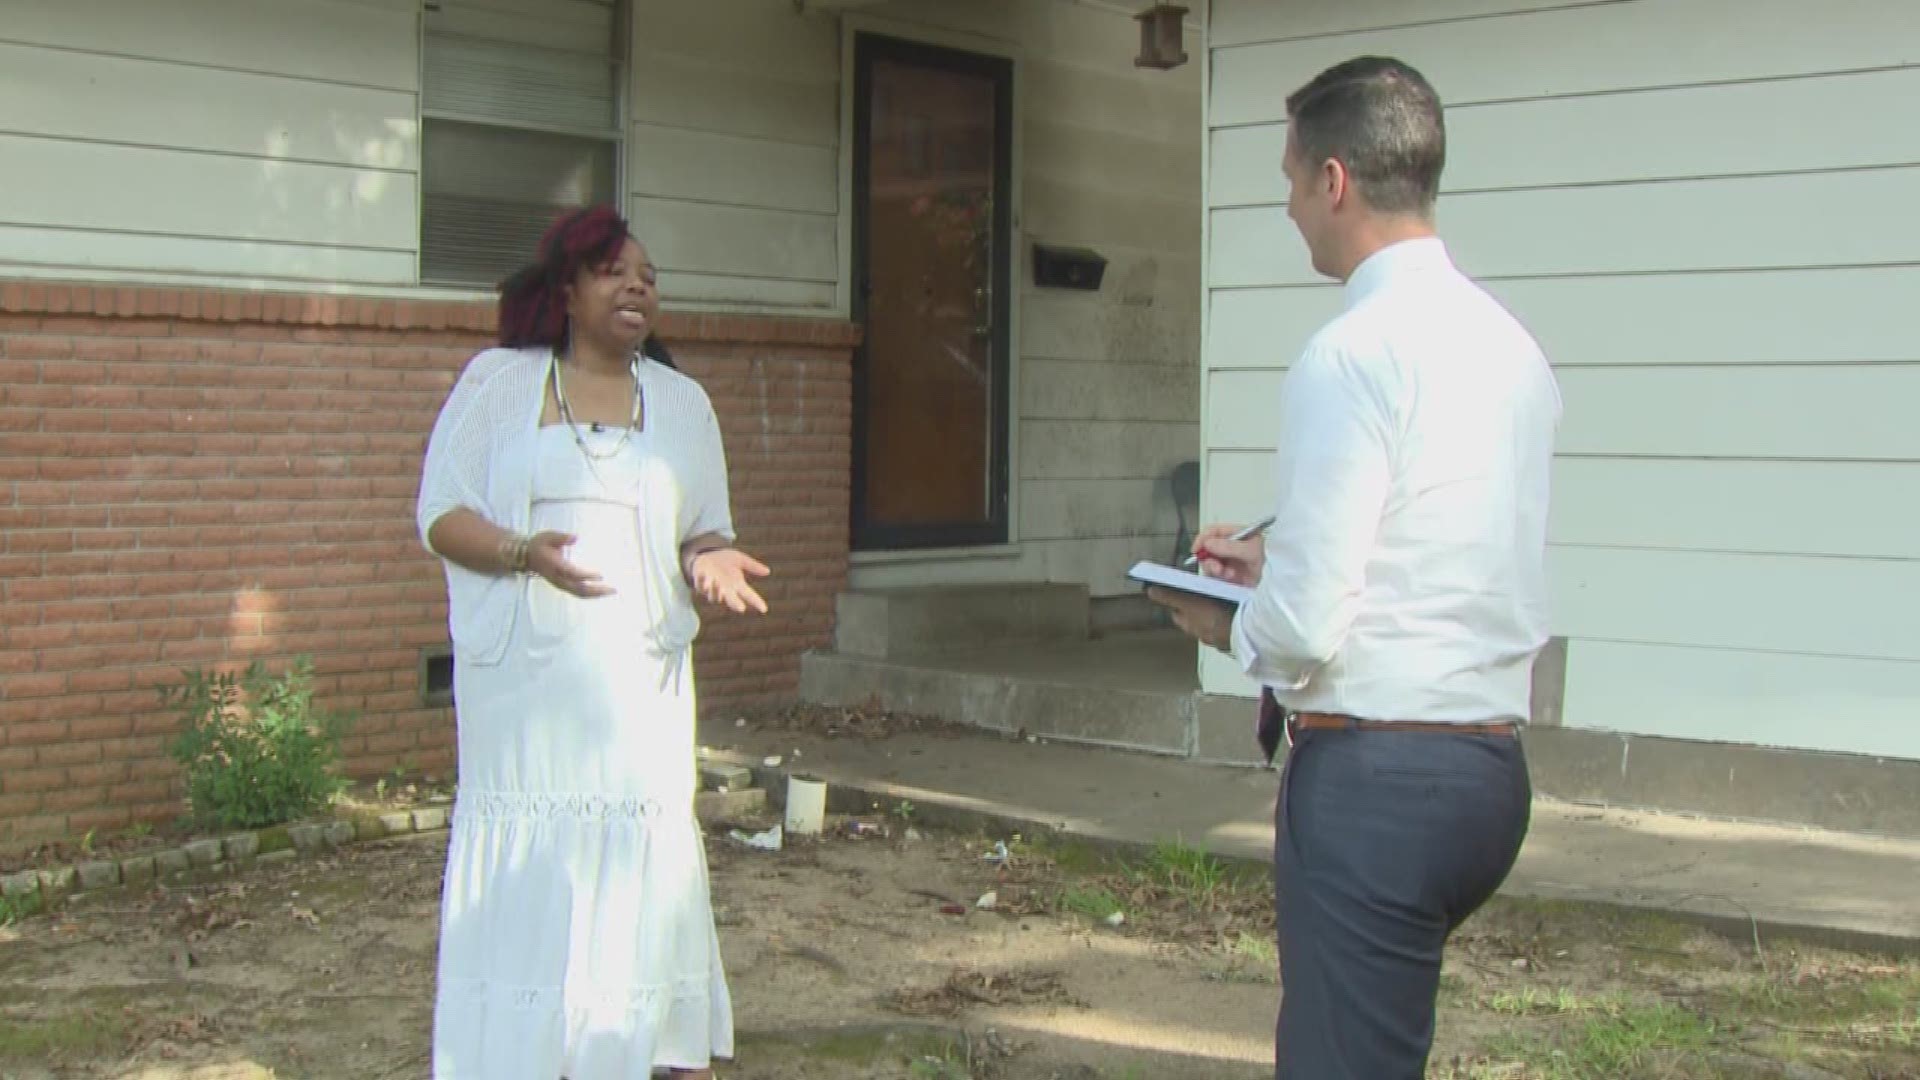 A struggling mother of three will be getting a home of her own thanks to Habitat for Humanity